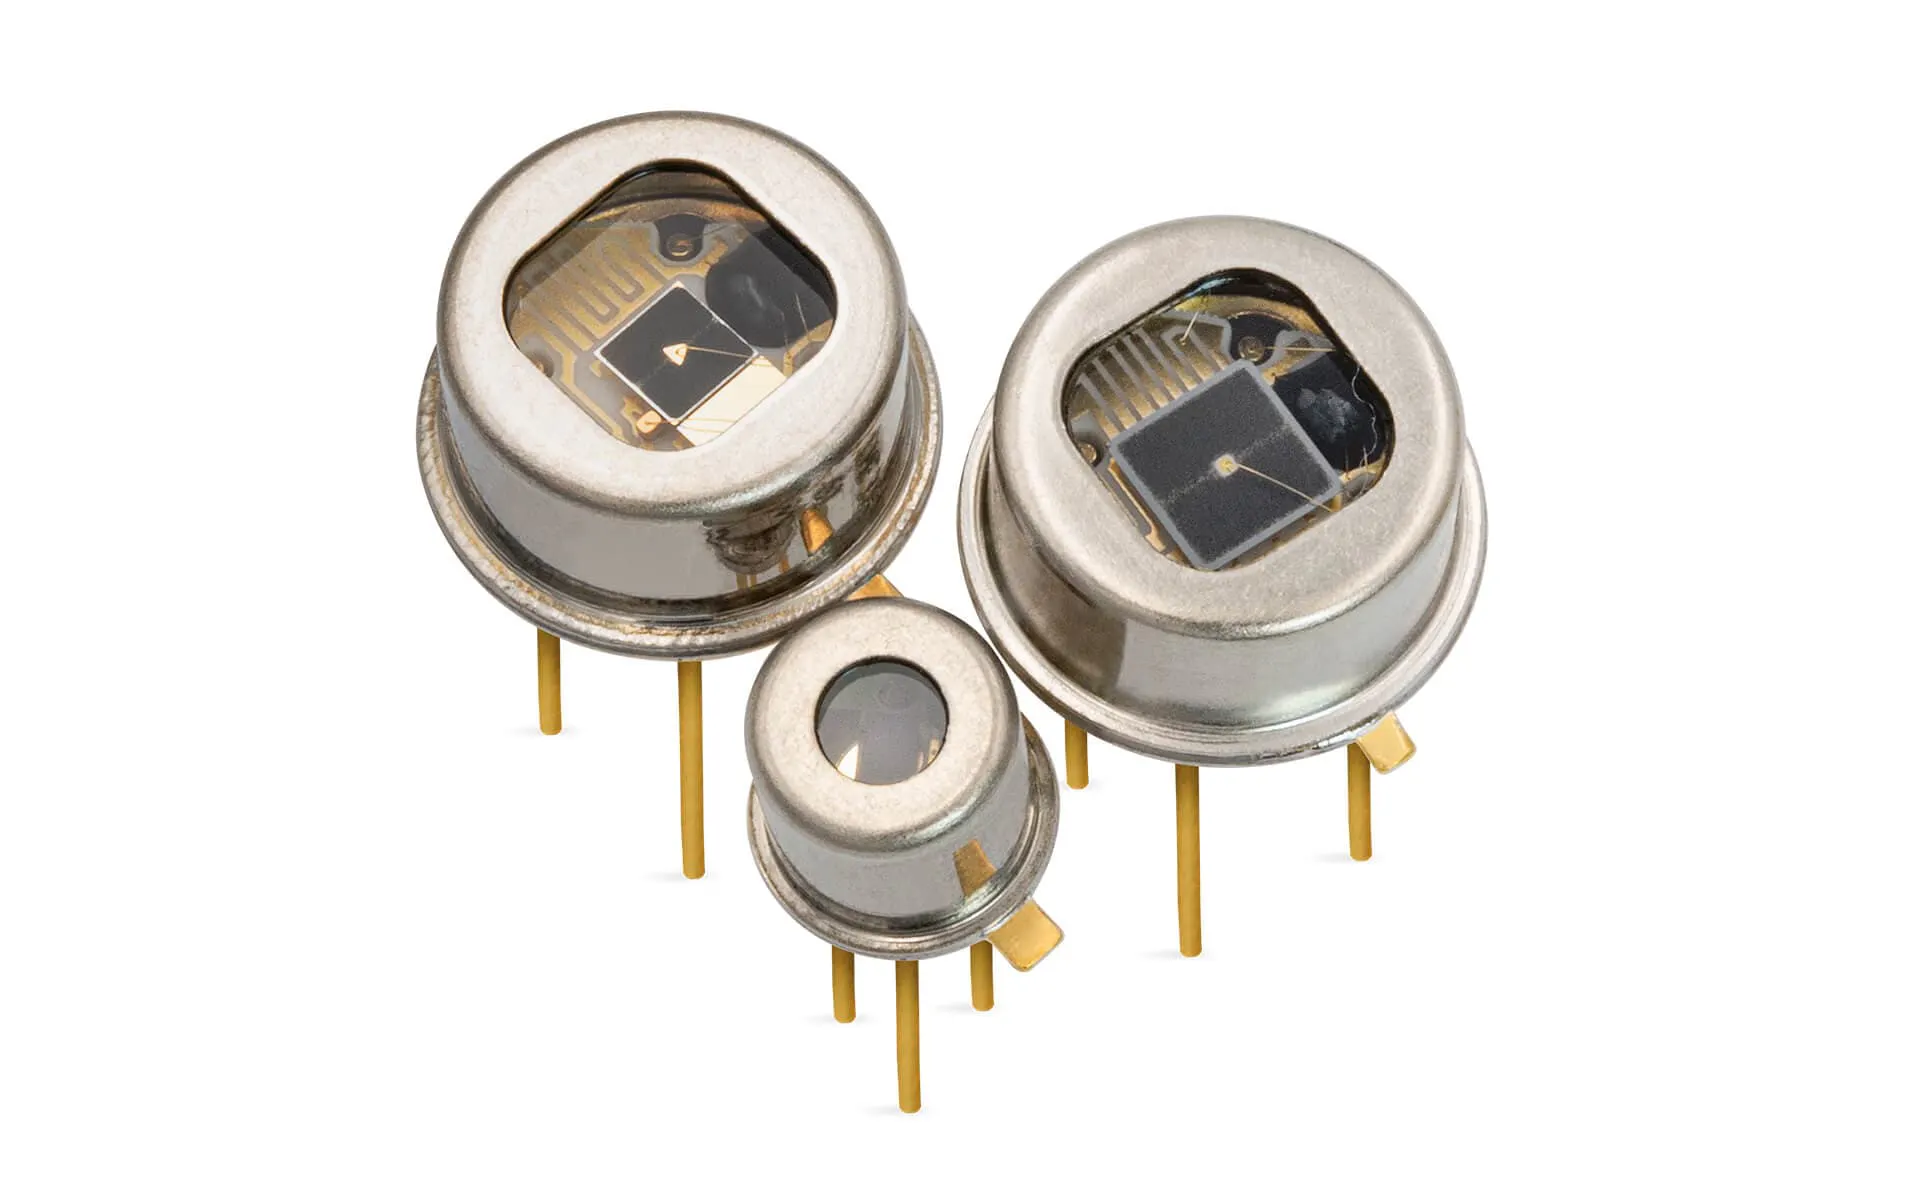 Single channel detectors from InfraTec